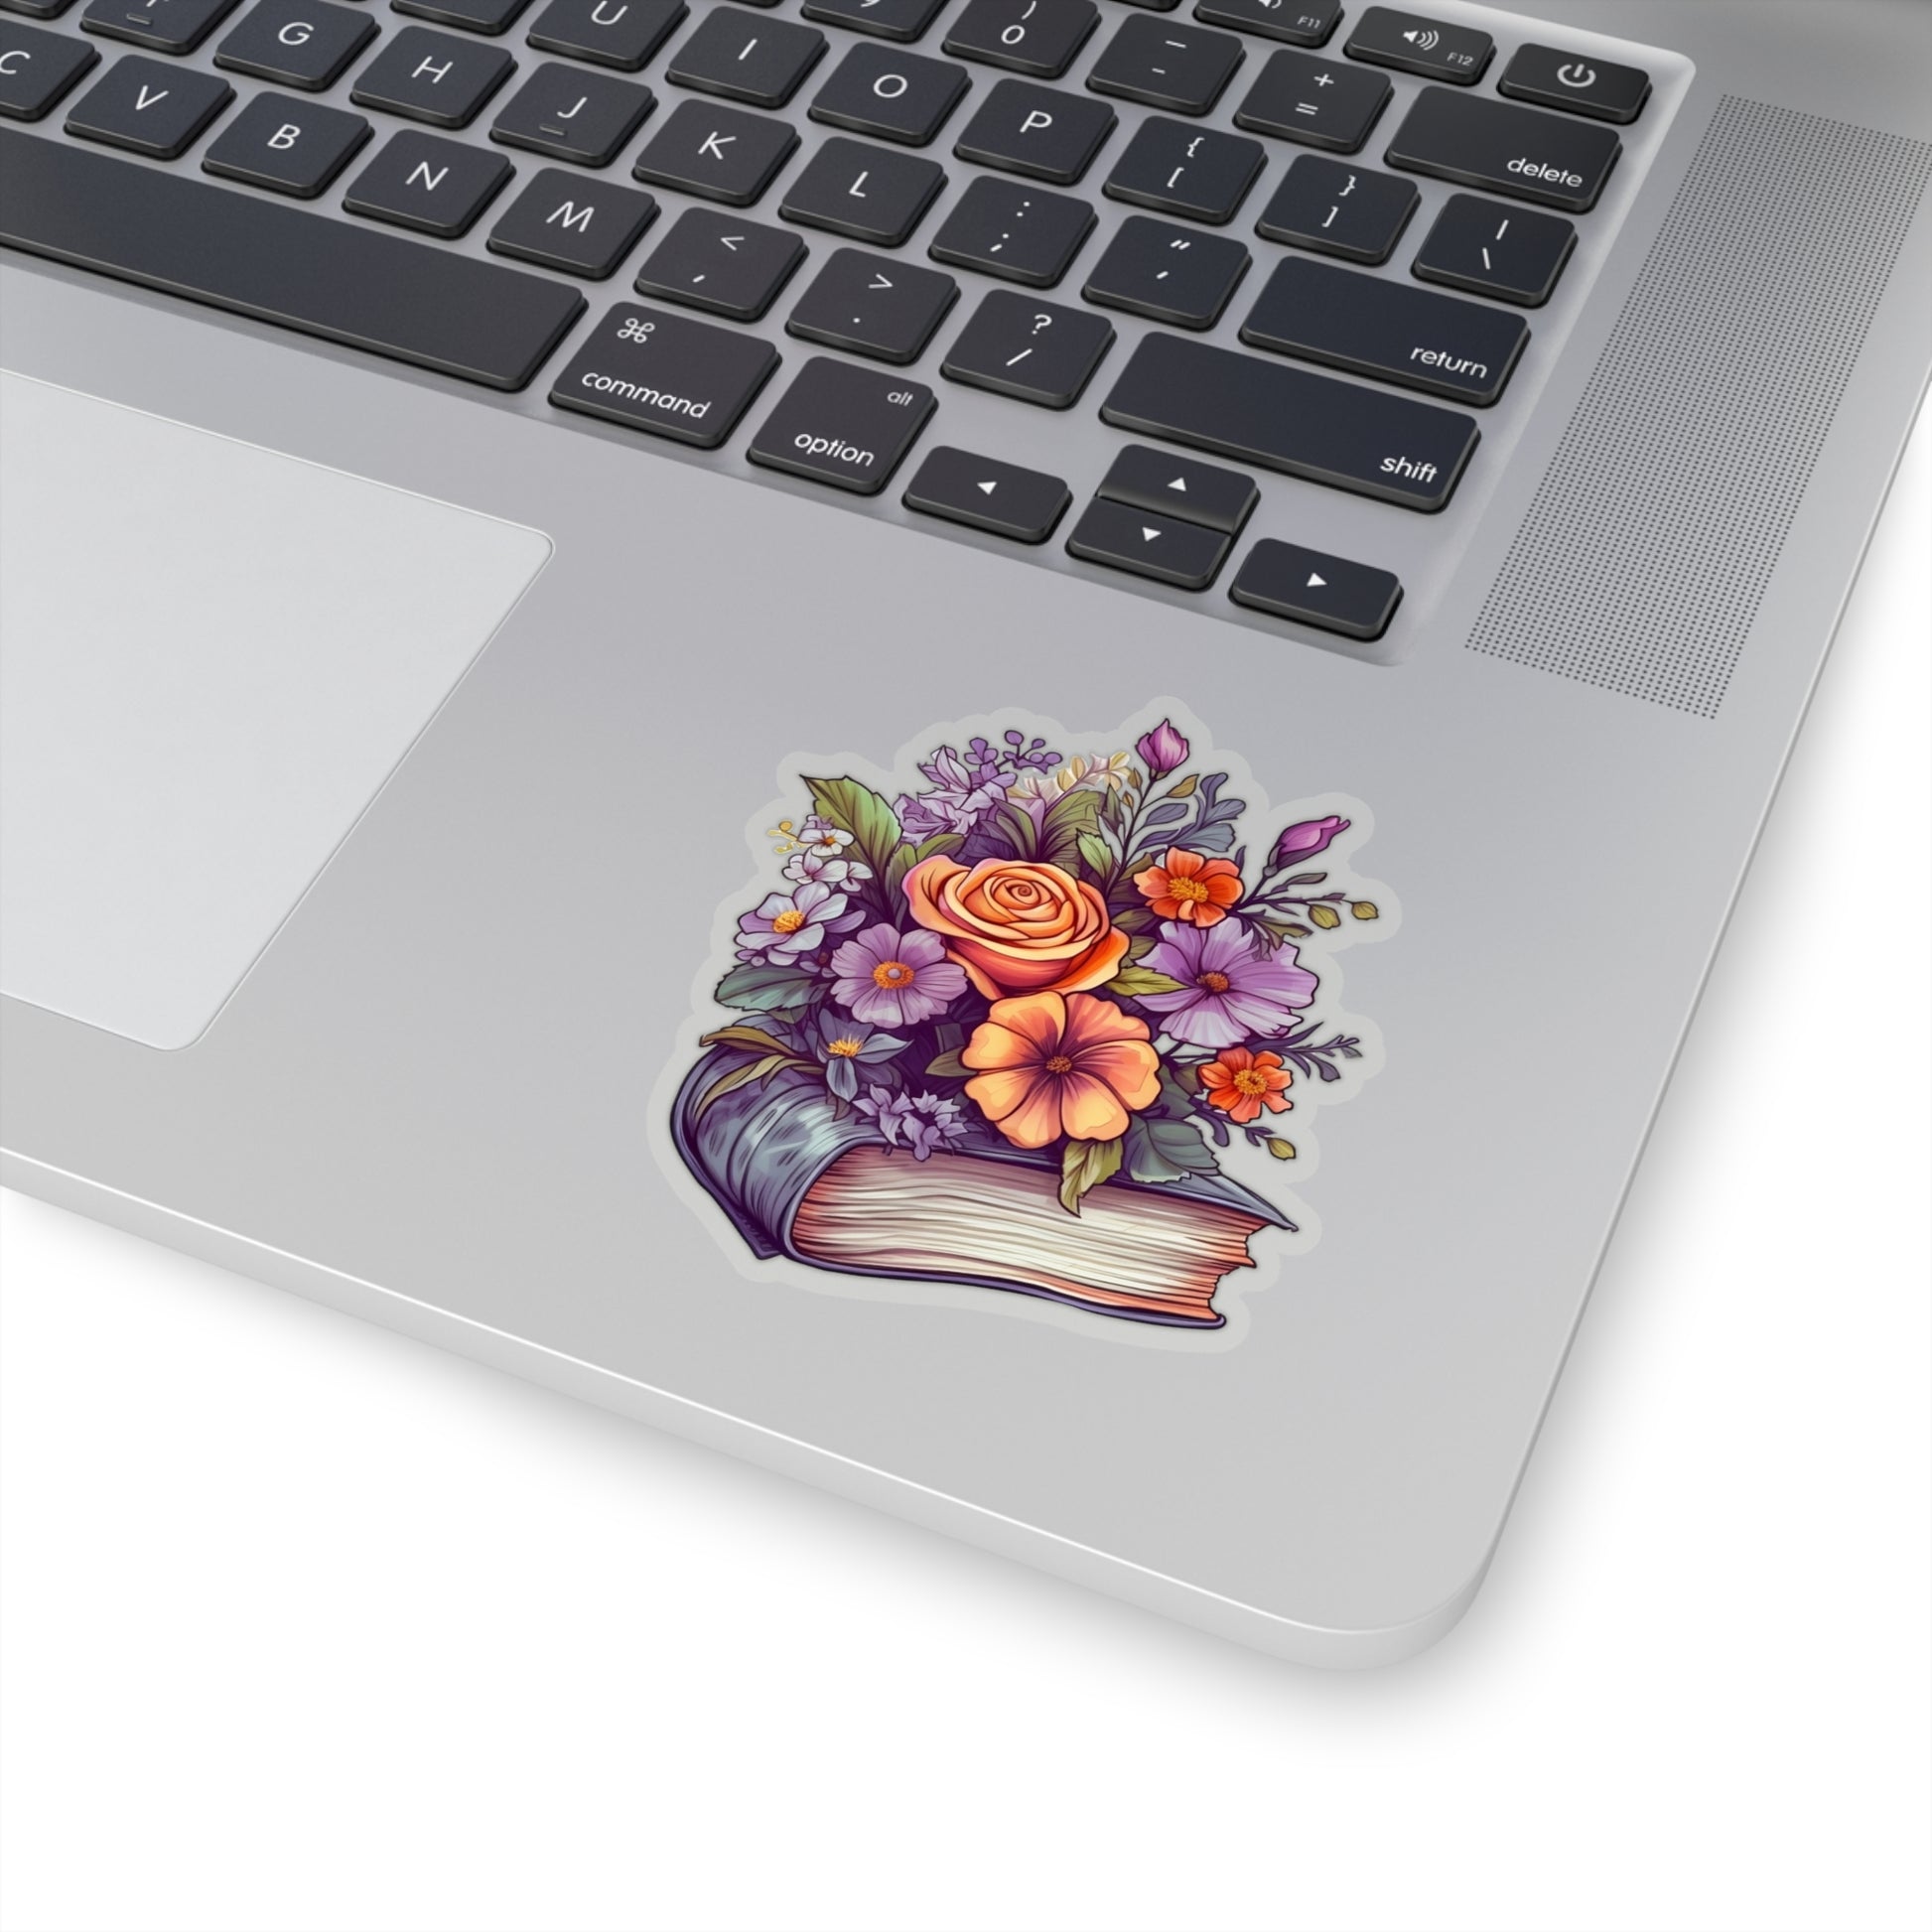 Book With Flowers Sticker, Reading Library Laptop Decal Vinyl Cute